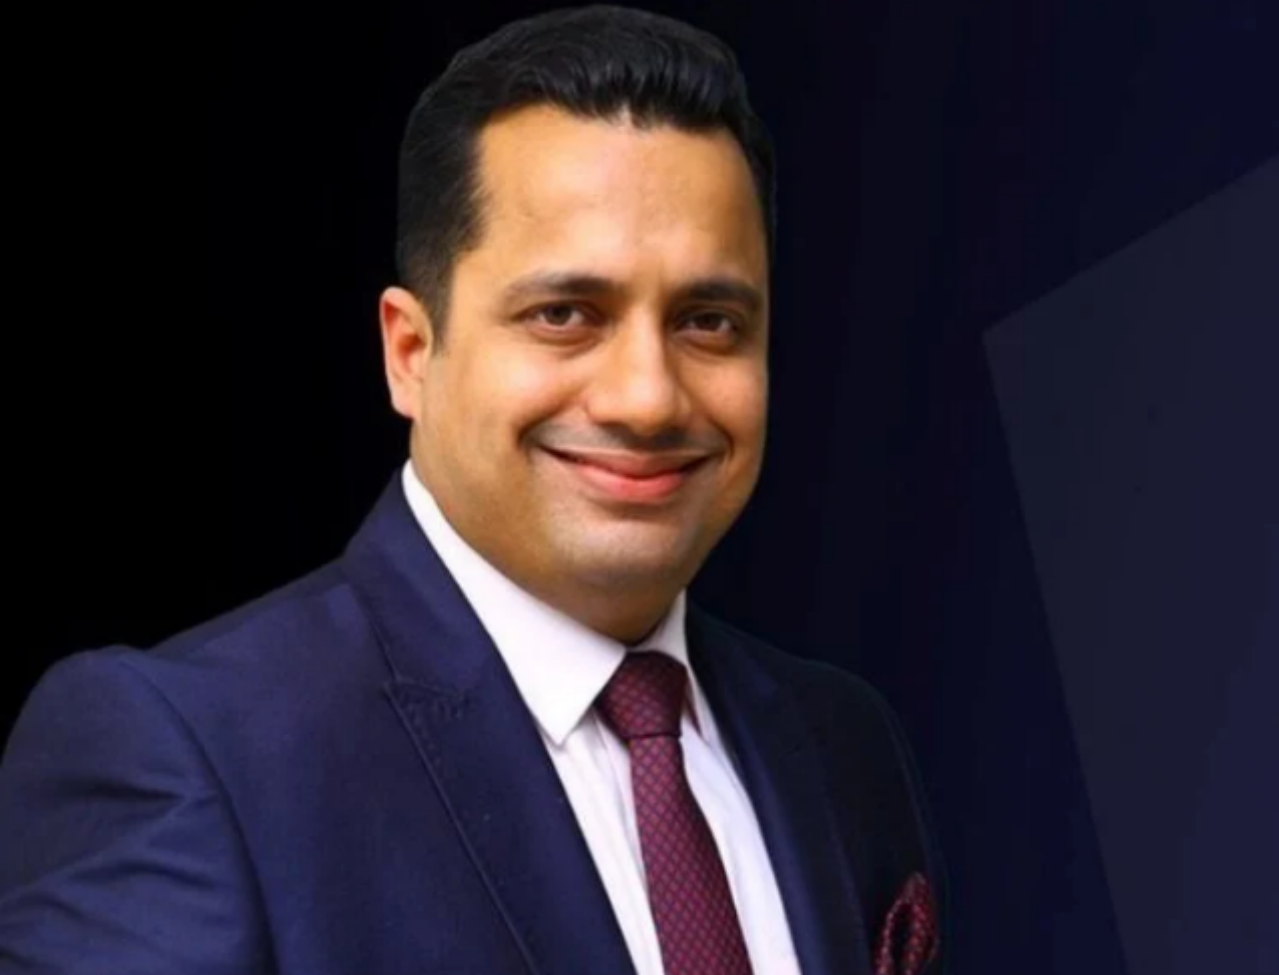 Vivek Bindra Story: Biography, Net Worth, Education, Age, Wife, Children, Books, Family, House, Interesting facts and everything about “Bada Business” Founder